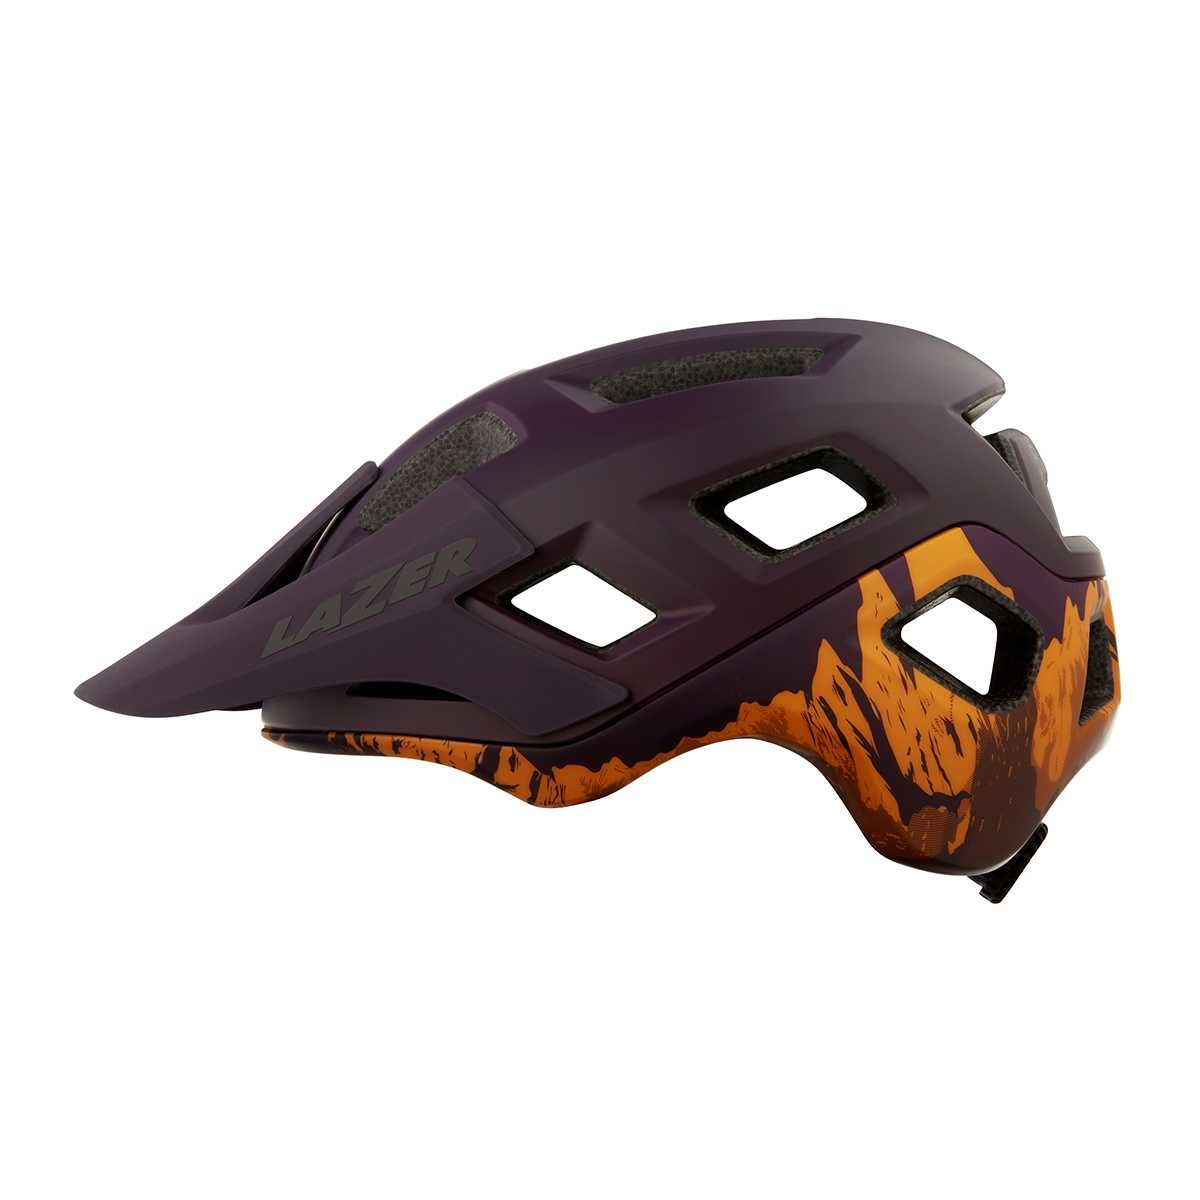 Kask rowerowy Lazer Coyote CE-CPSC matte mulberry orange